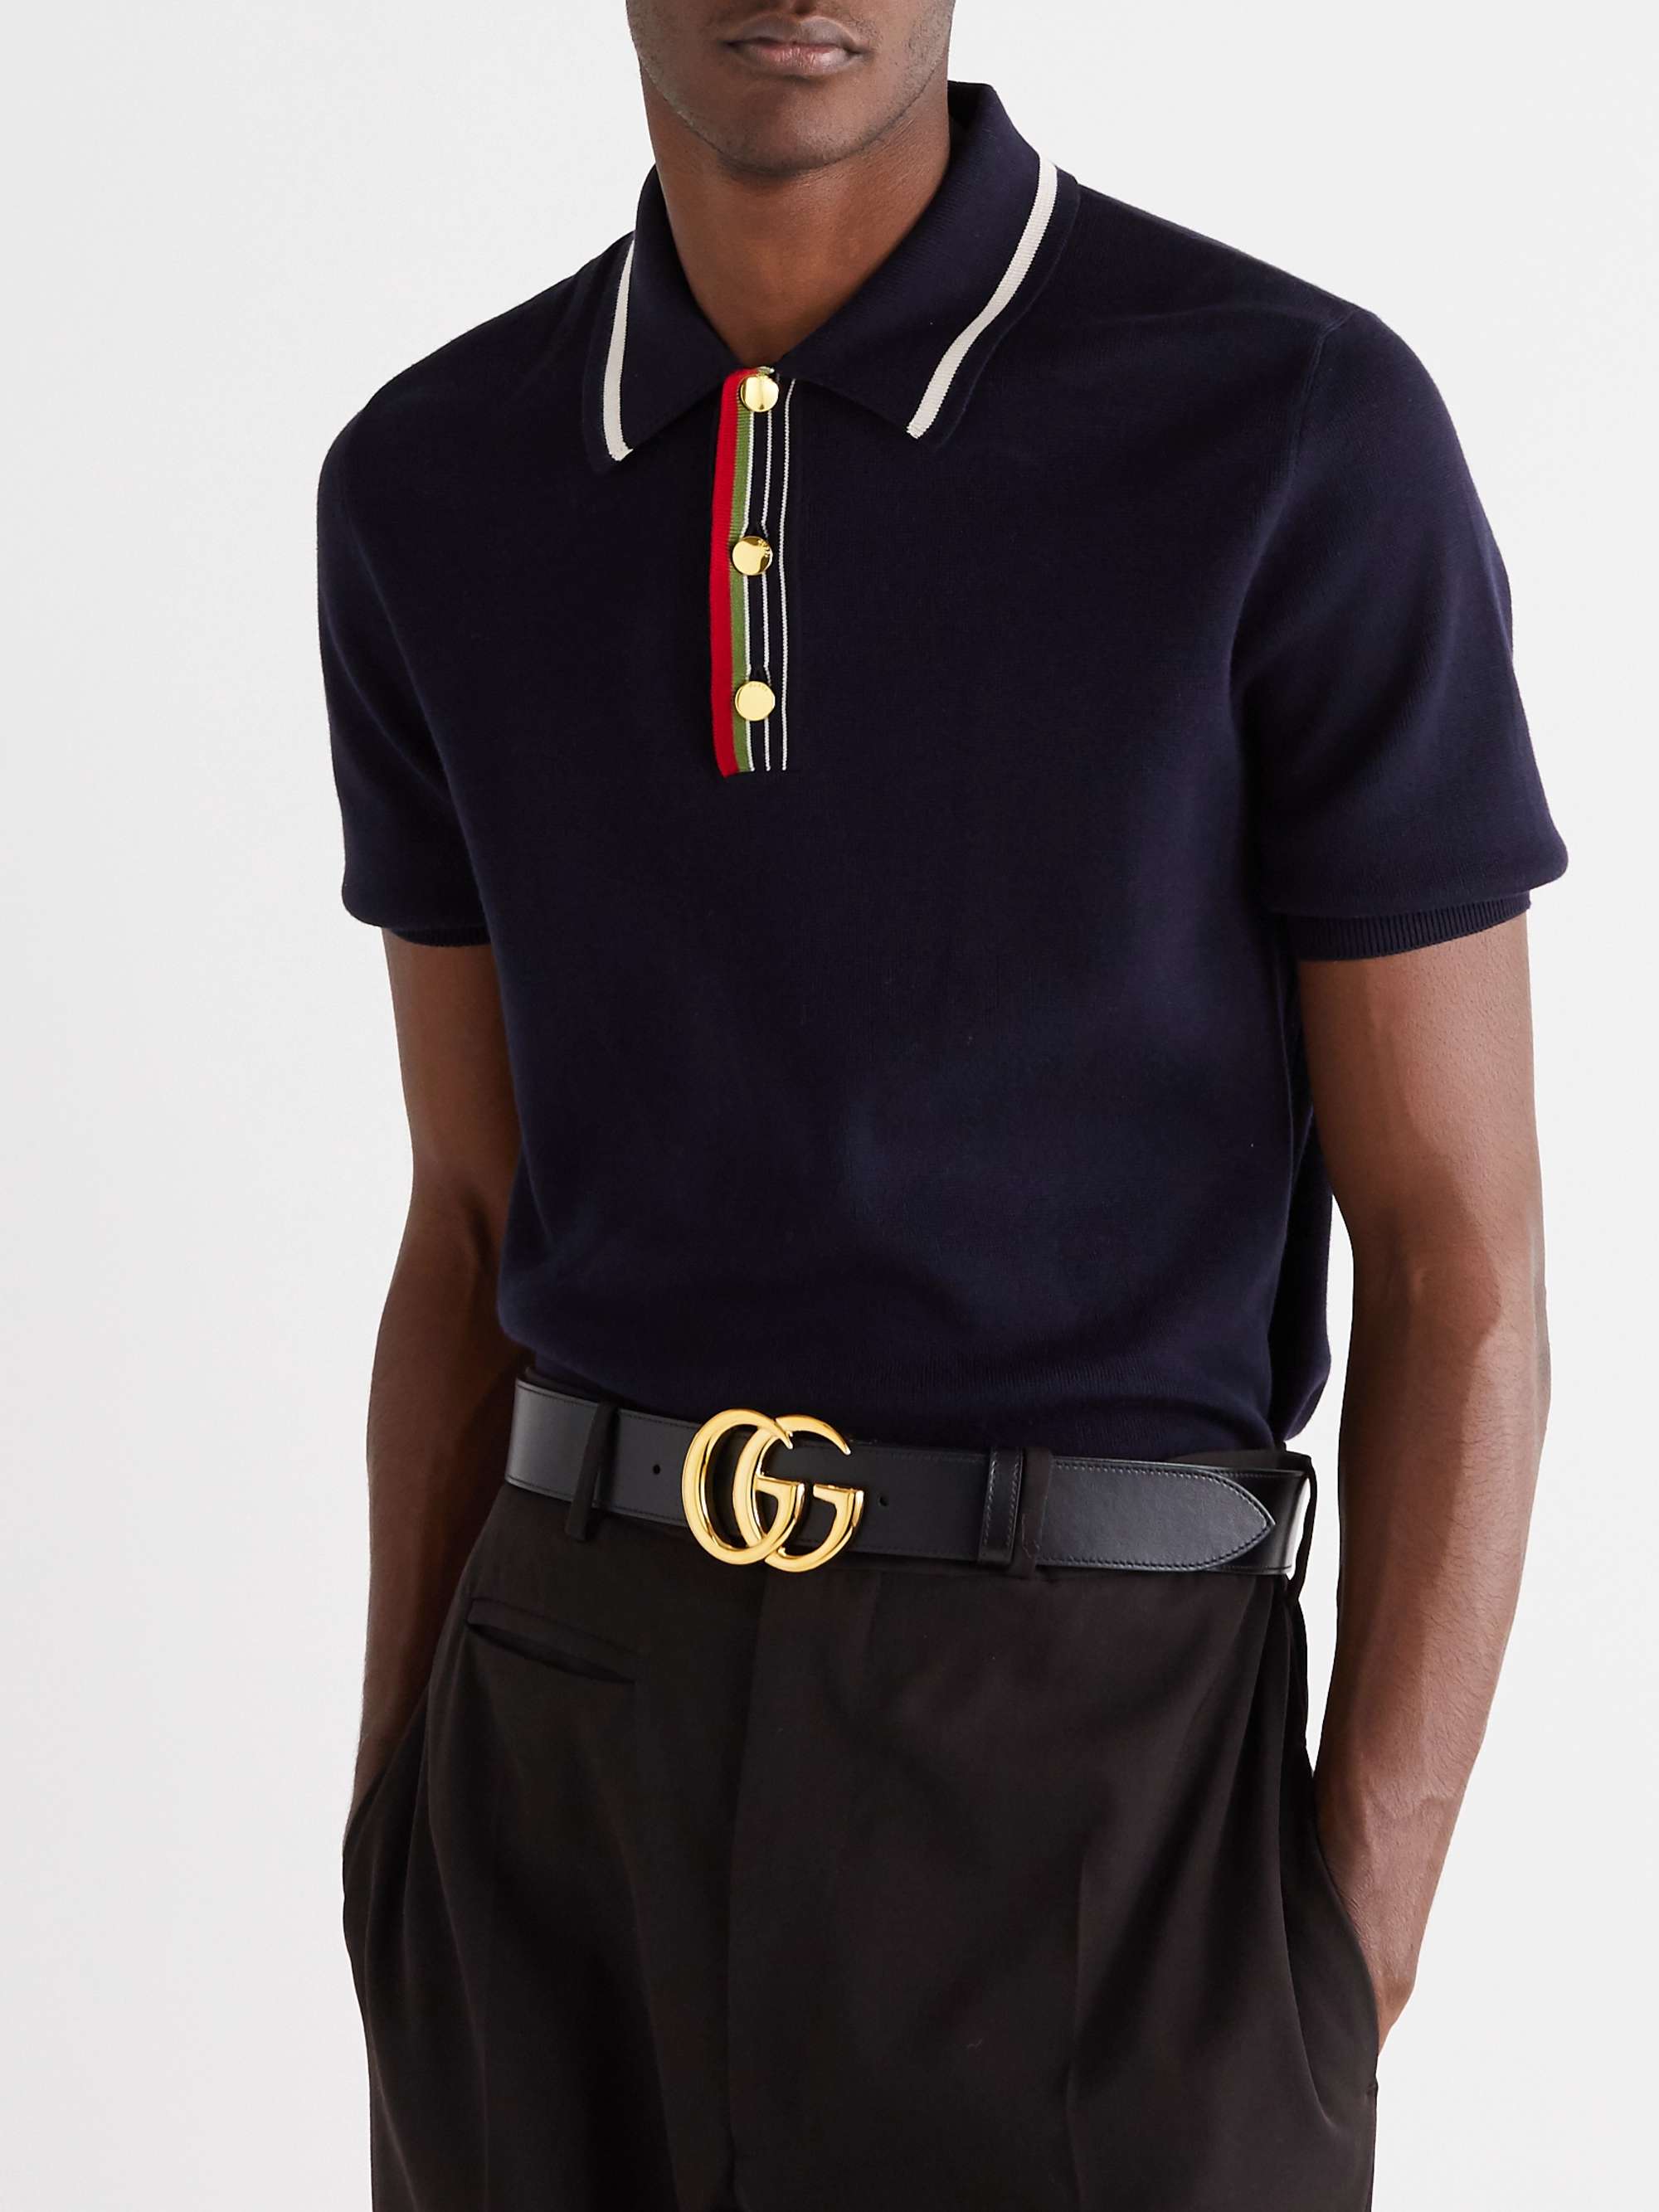 GUCCI GG Marmont leather belt